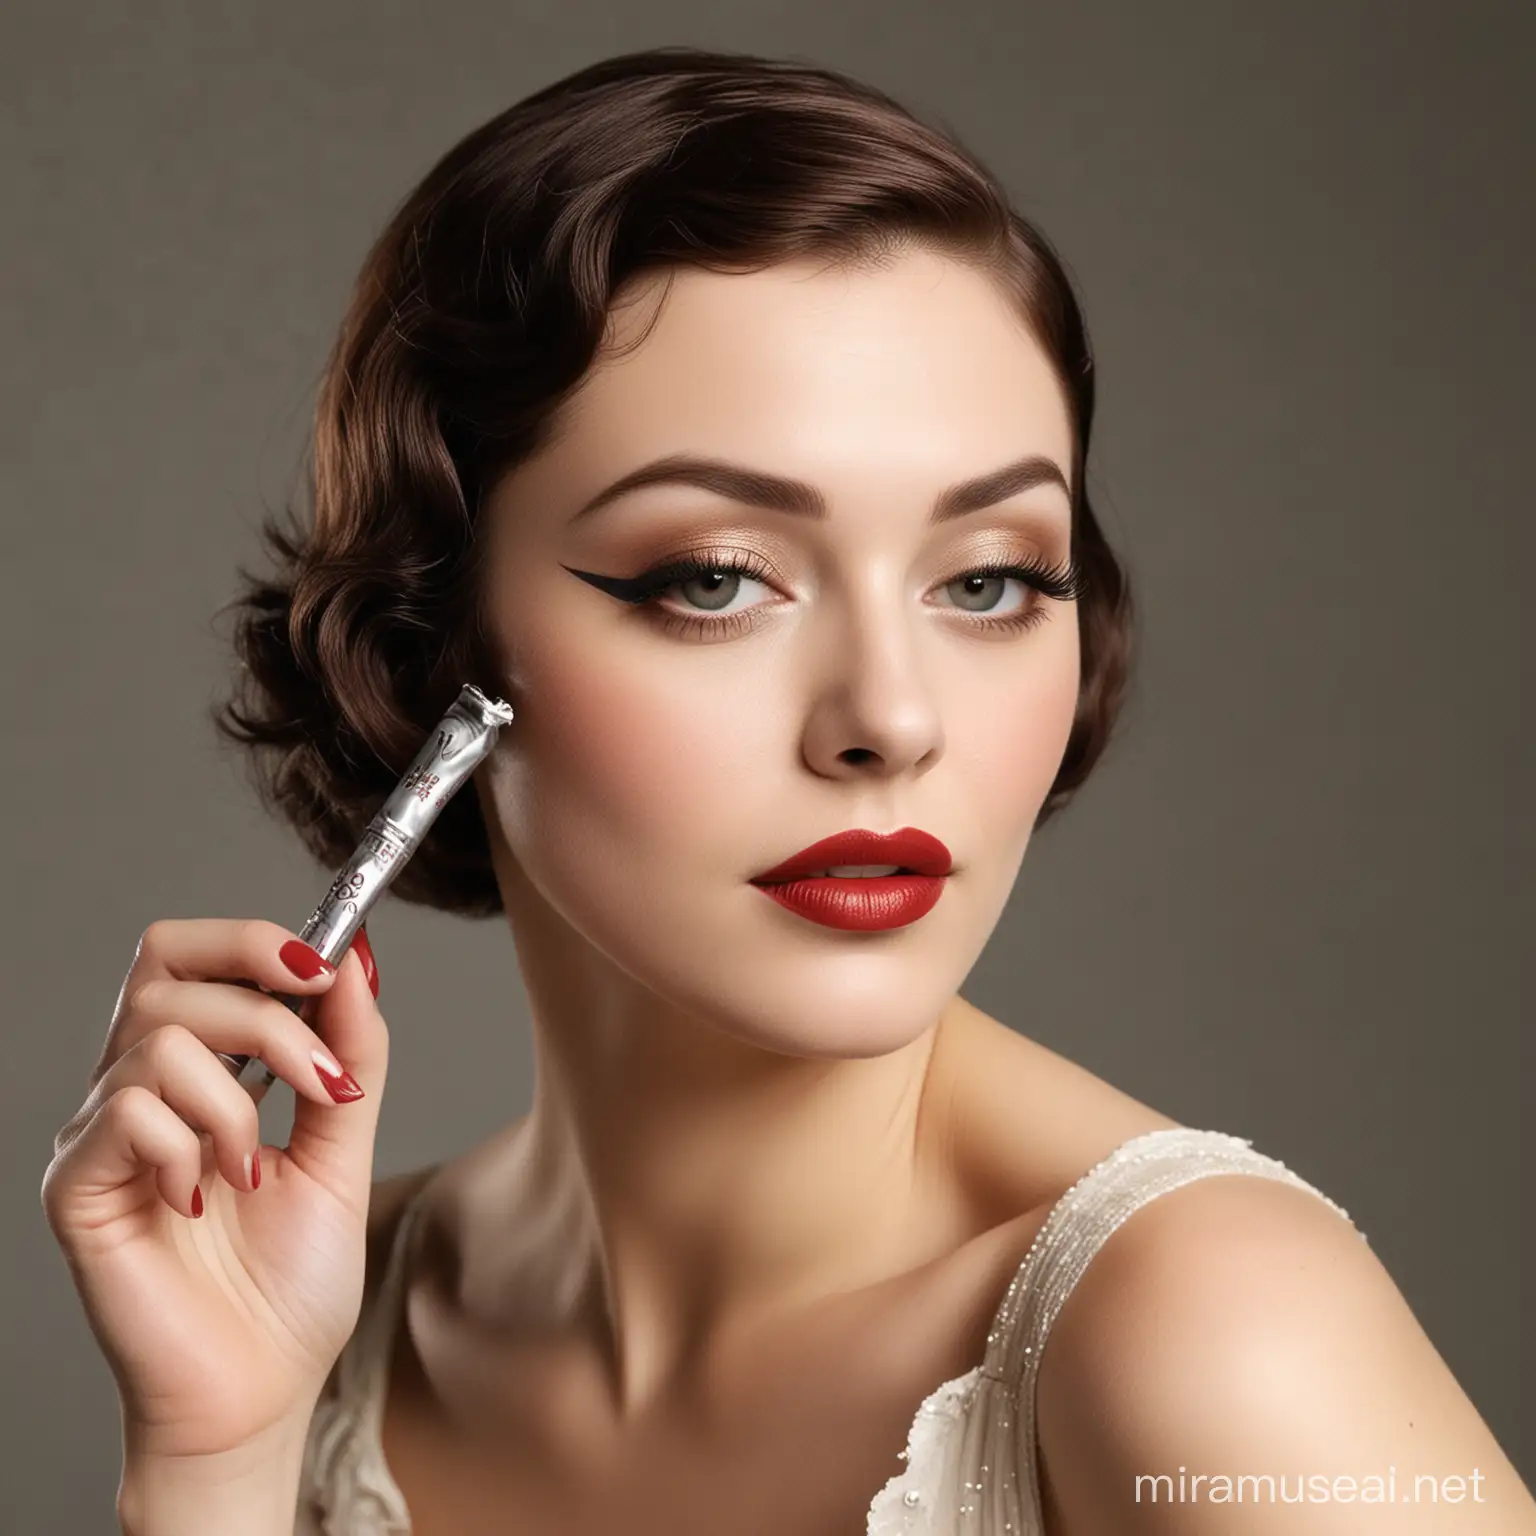 Vintage Makeup Evolution From Lipstick Tubes to Ethical Cosmetics